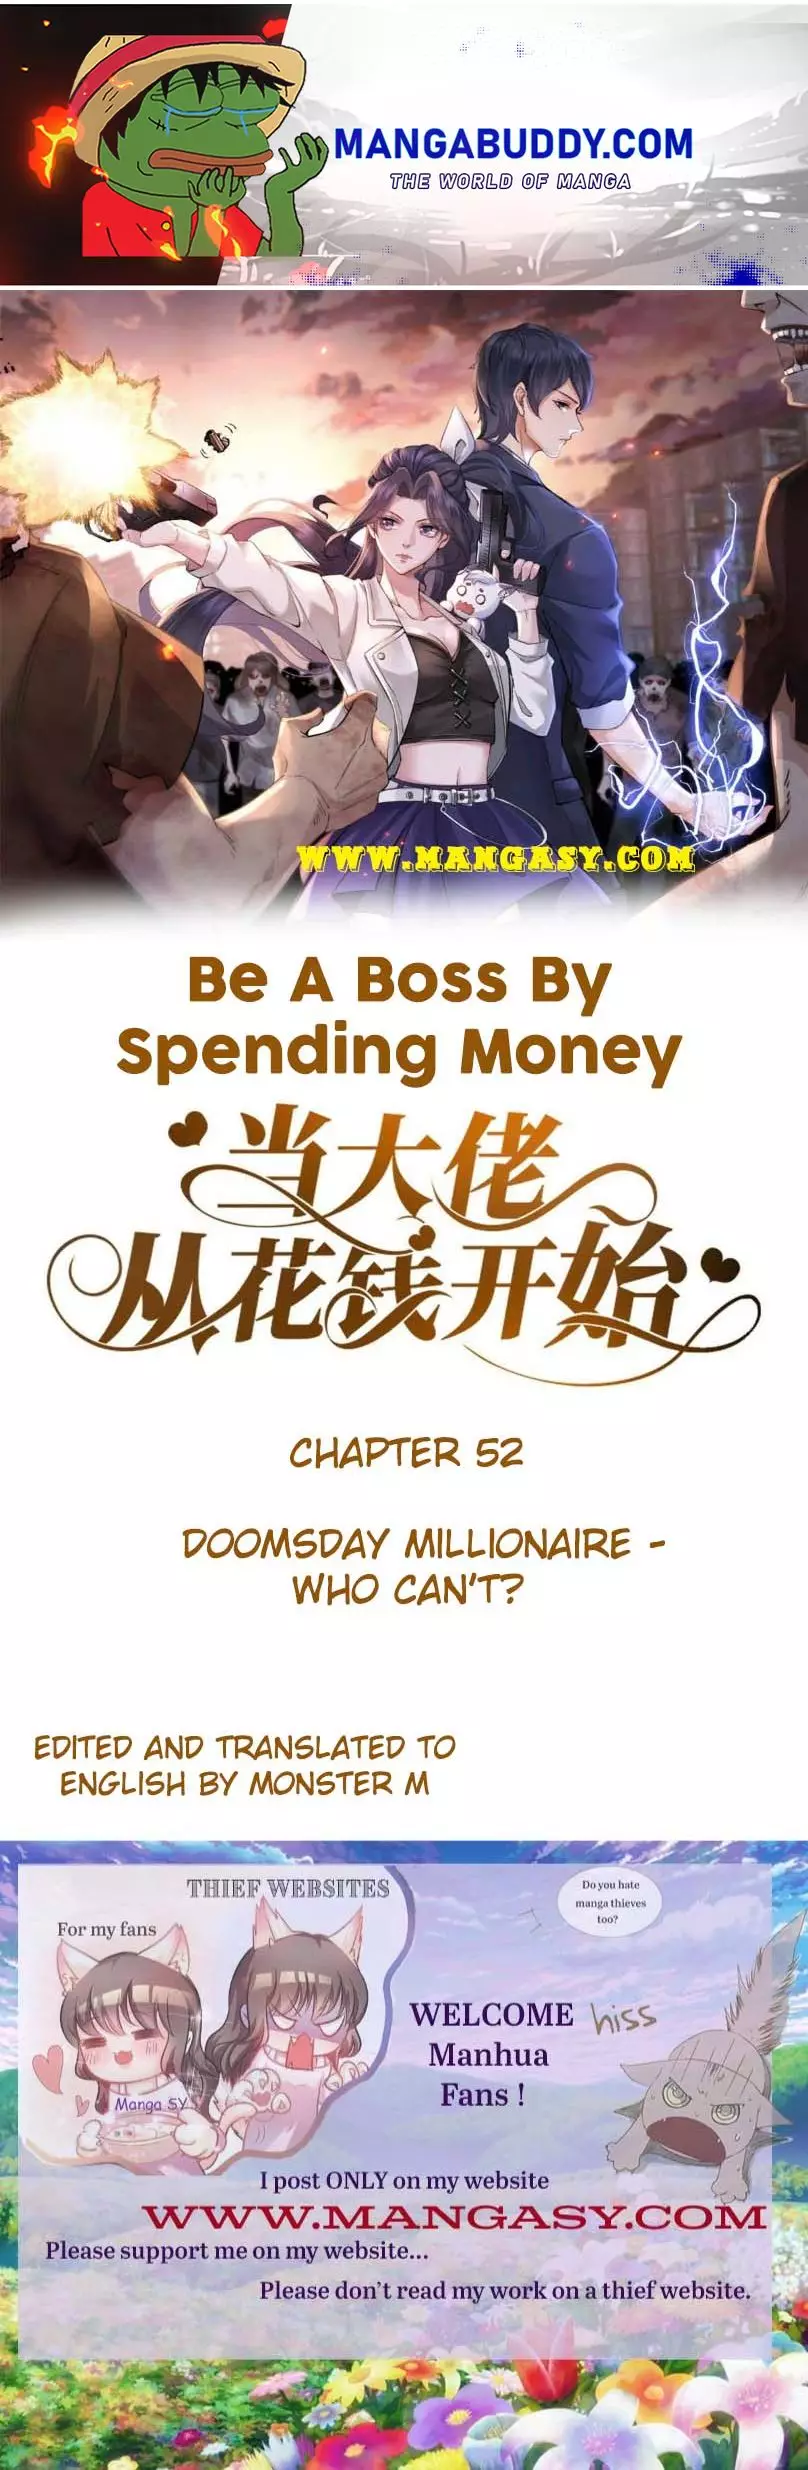 Becoming A Big Boss Starts With Spending Money - 52 page 1-66048b7f